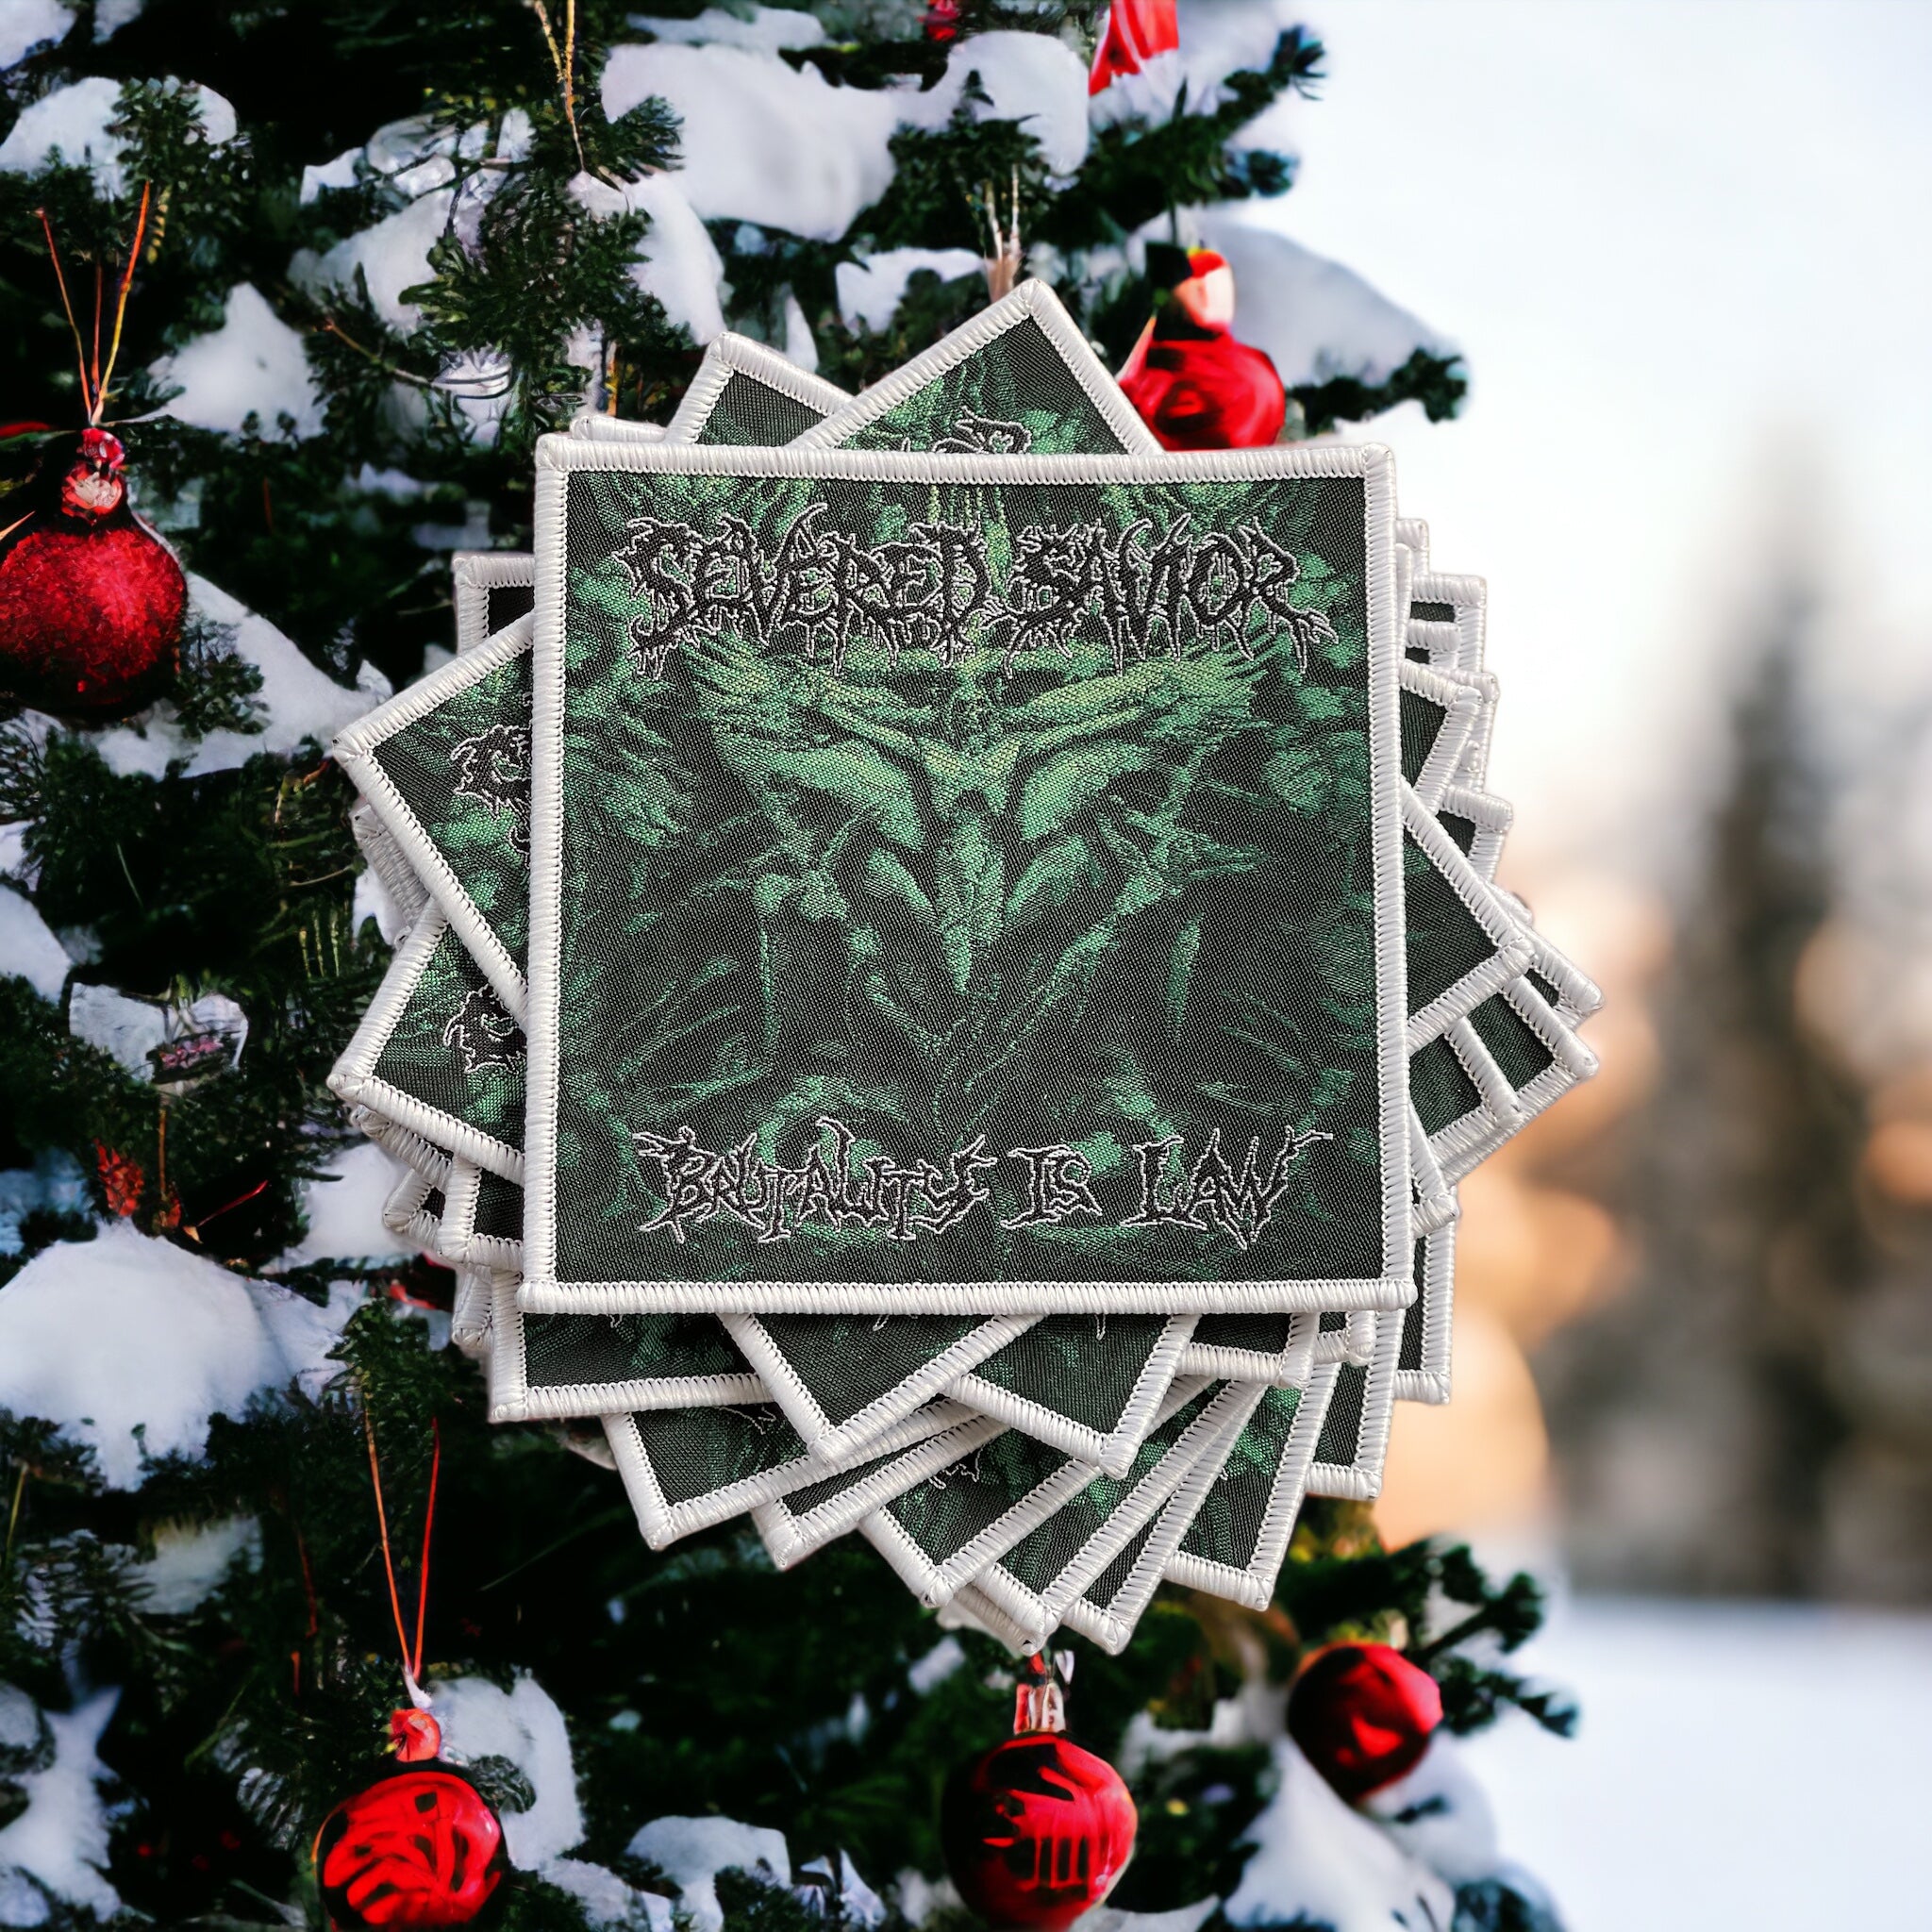 Severed Savior - Square Brutality is Law Patch - White Border